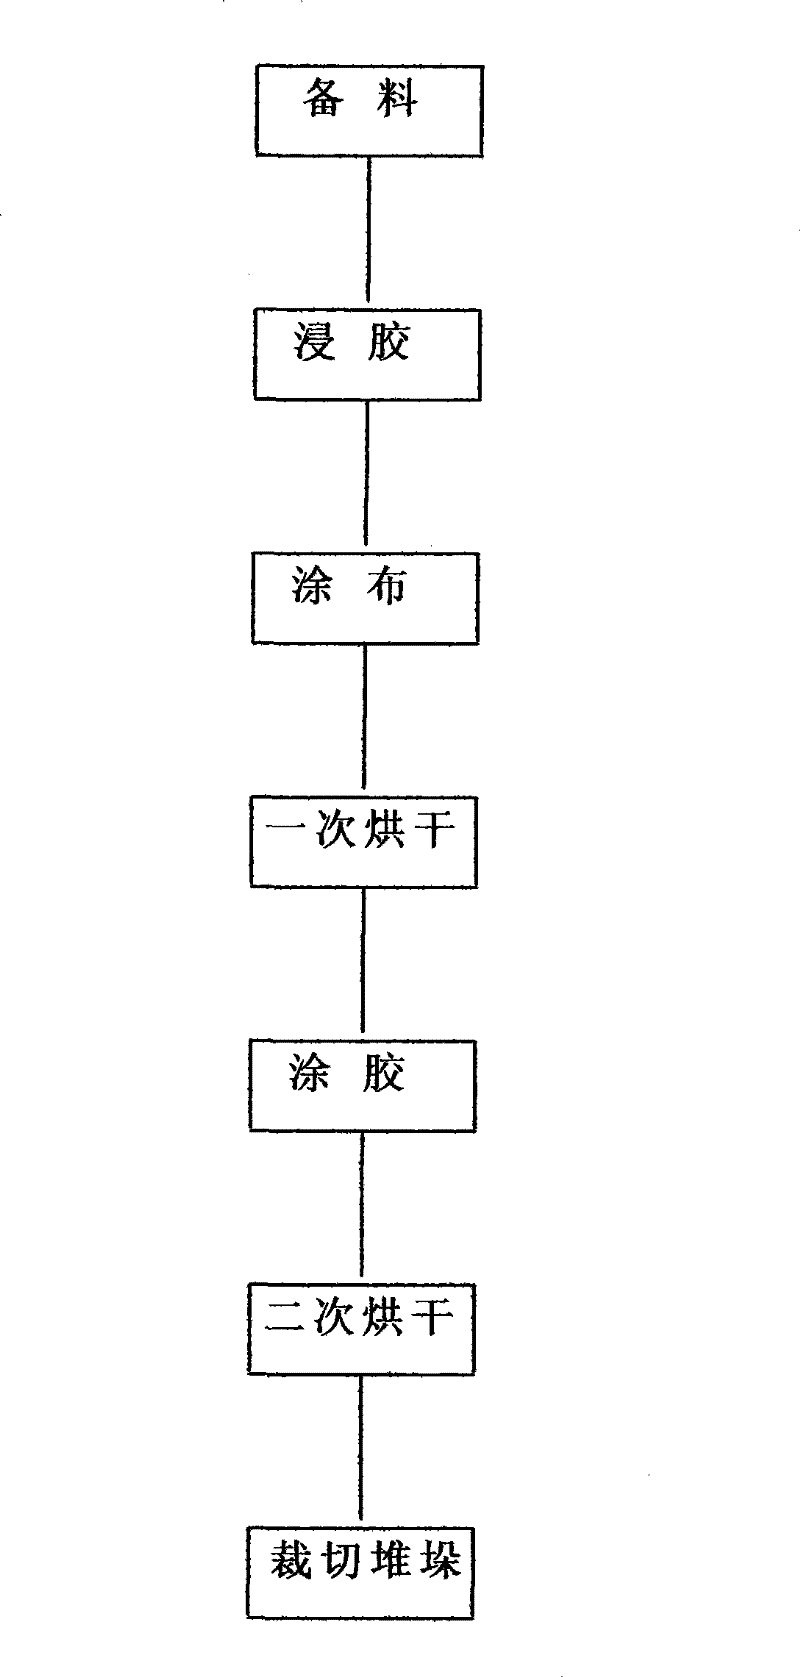 Production method of abrasion-proof decorating paper